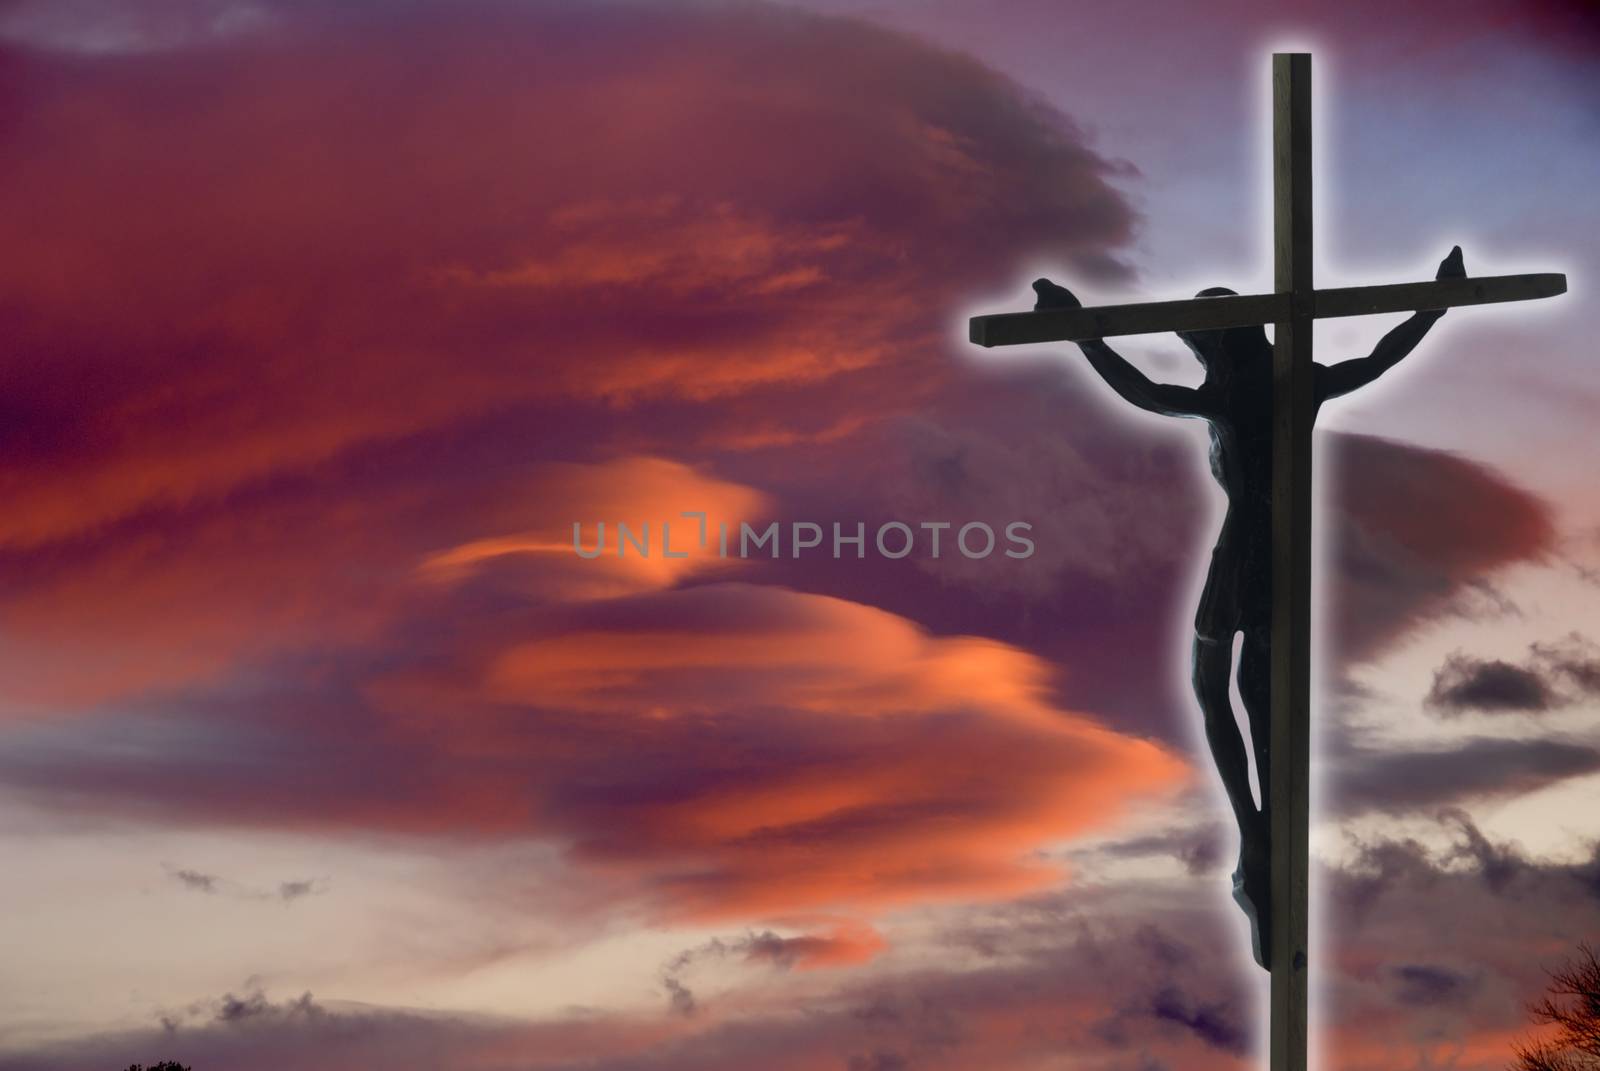 Jesus Christ on the Cross by f/2sumicron